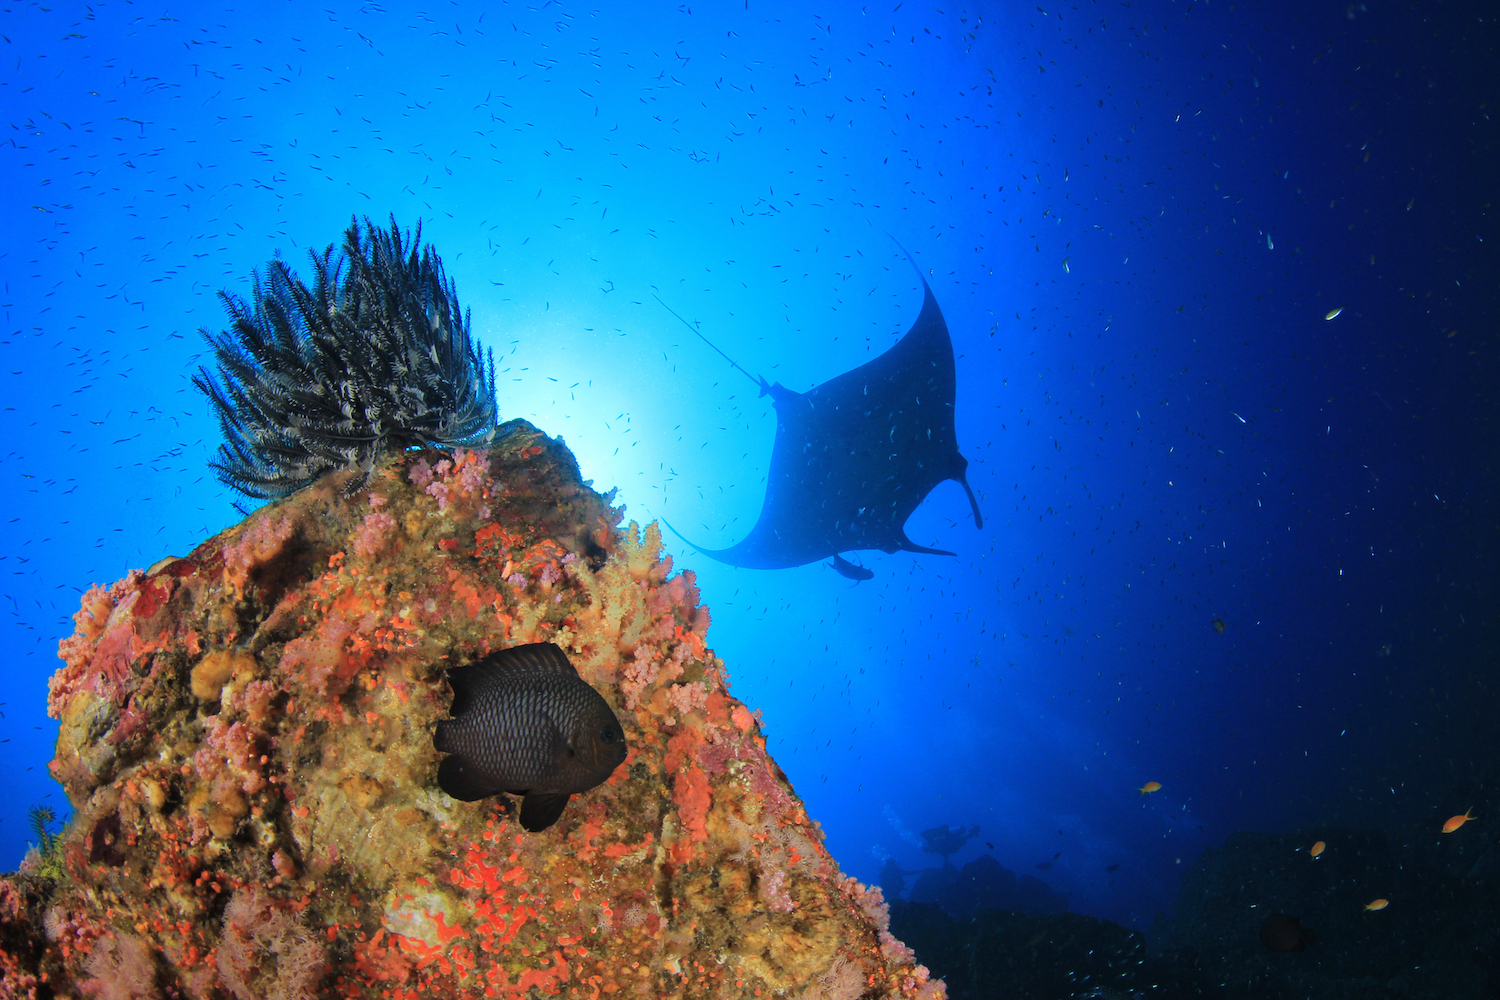 A giant mobula passing by a pinnacle at a coral reef in South East Asia